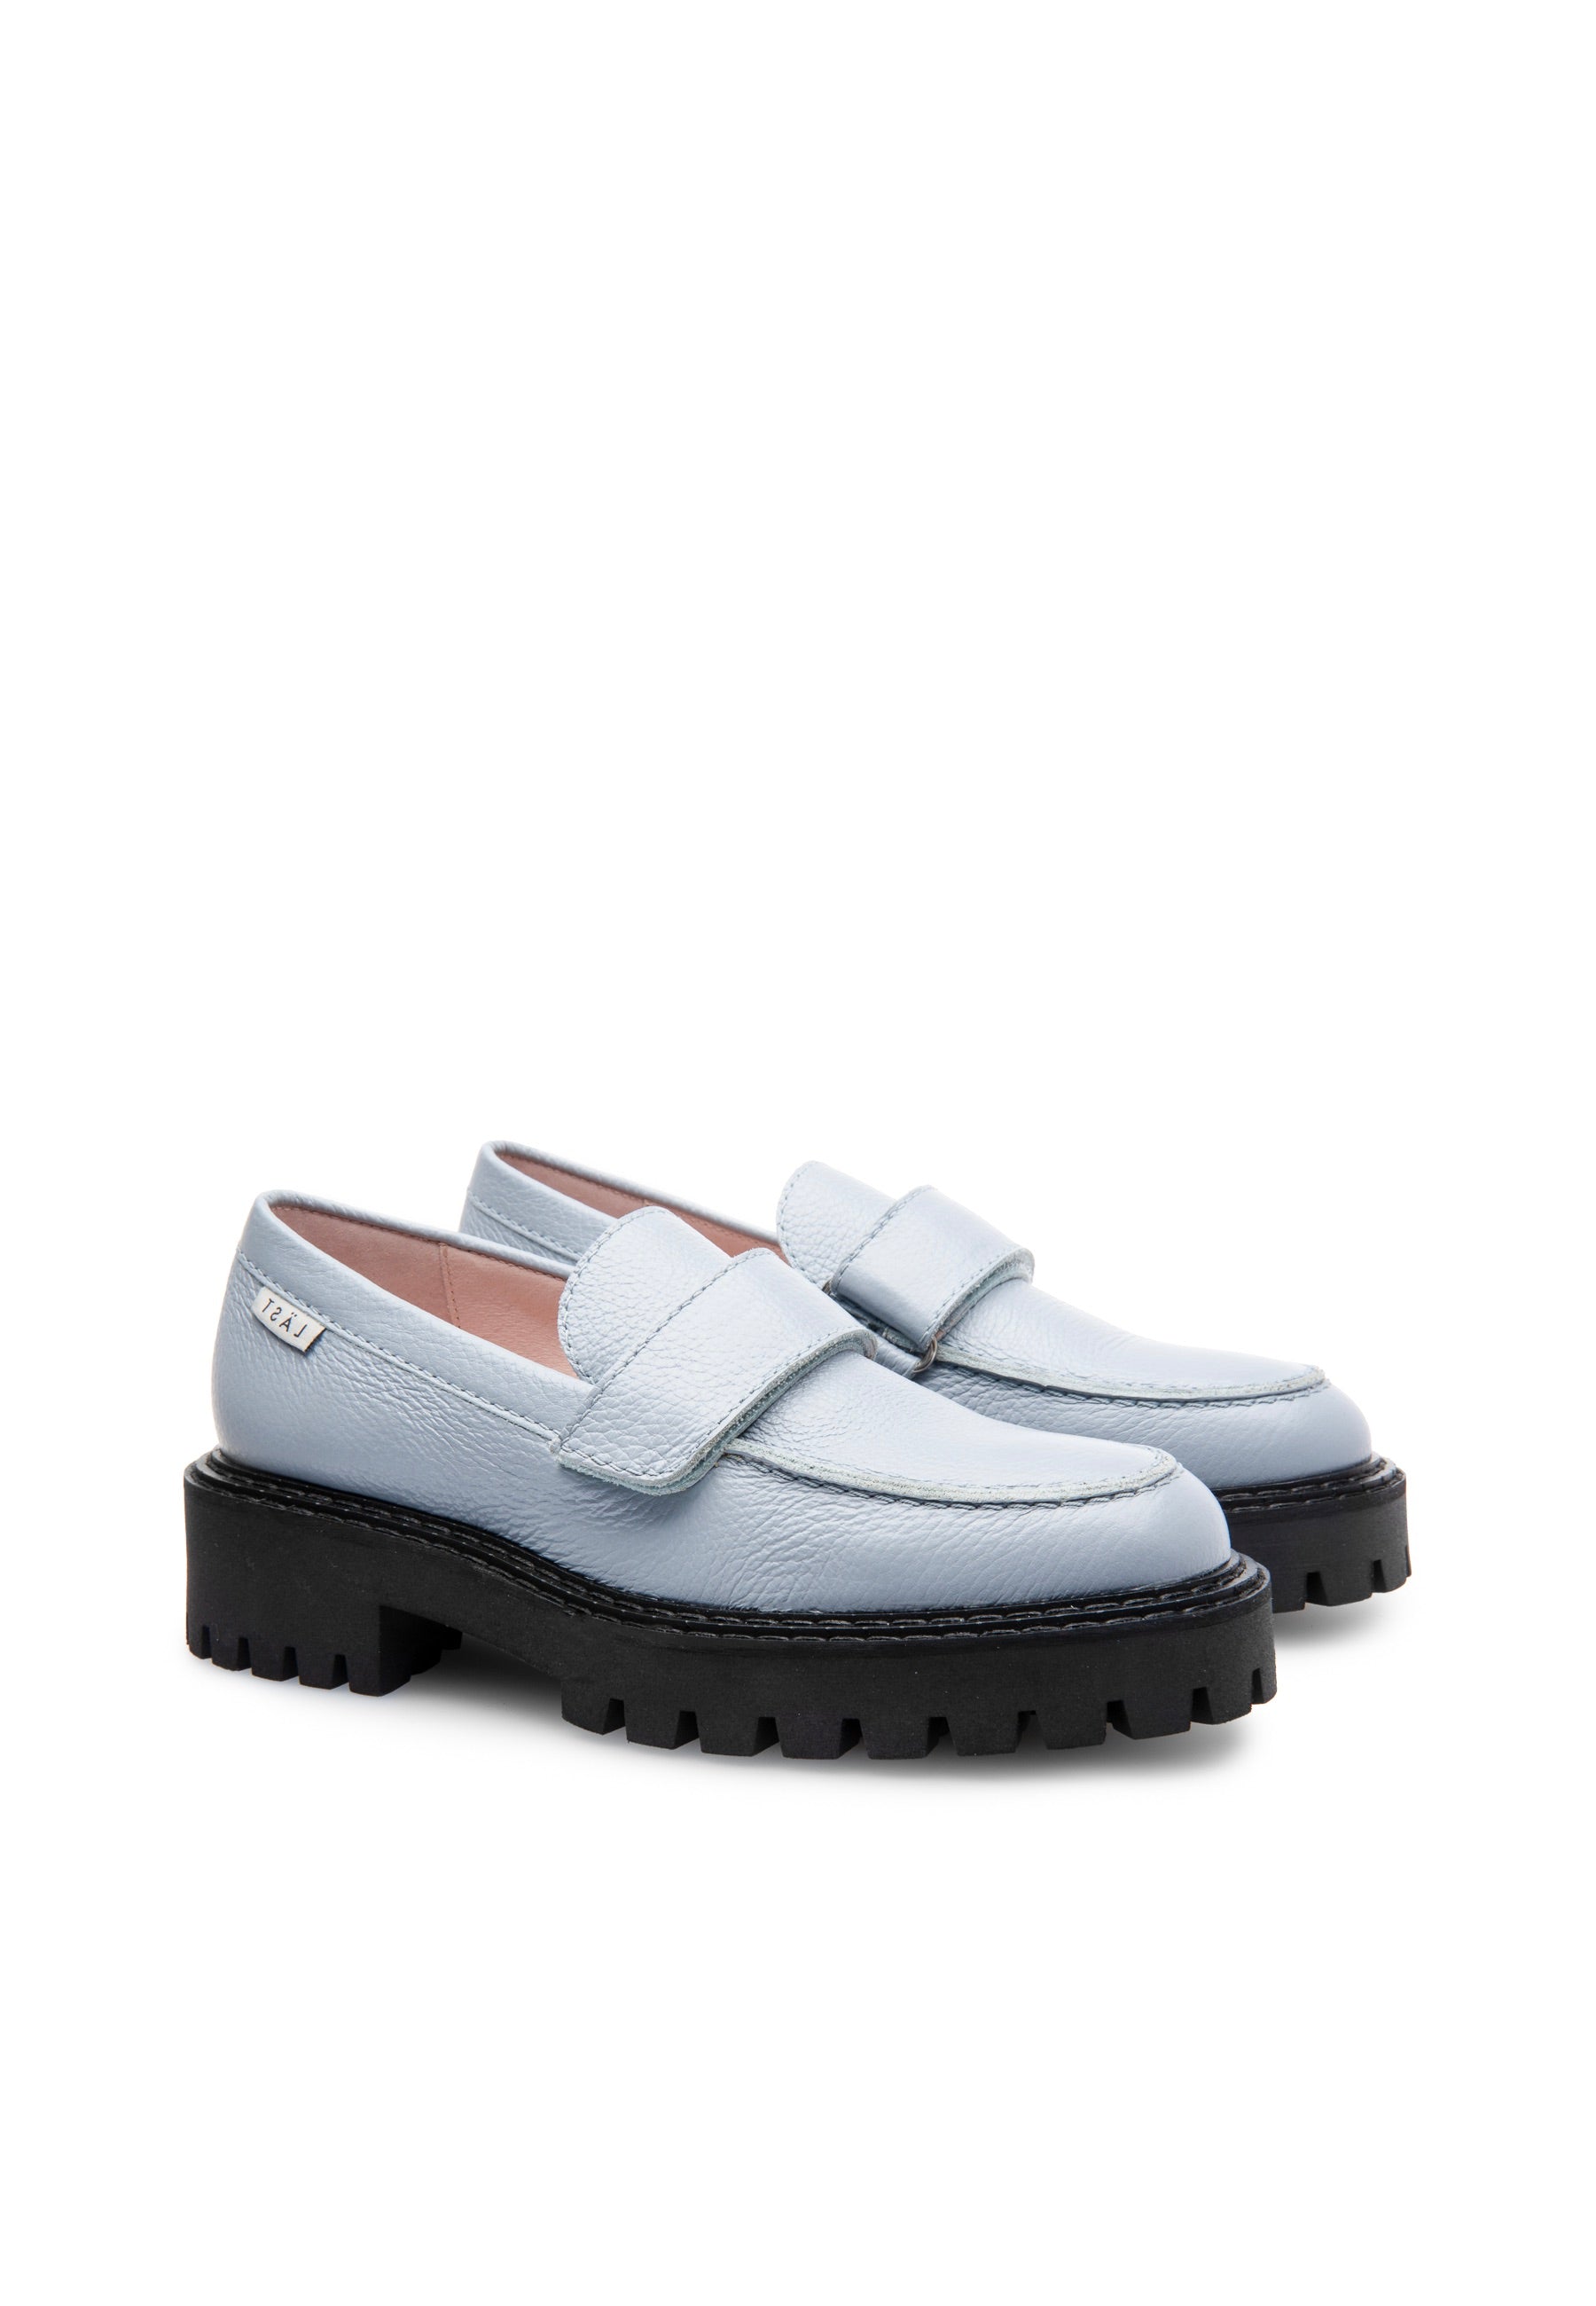 Lady Dusty Blue Leather Loafers LAST1550 - 2a